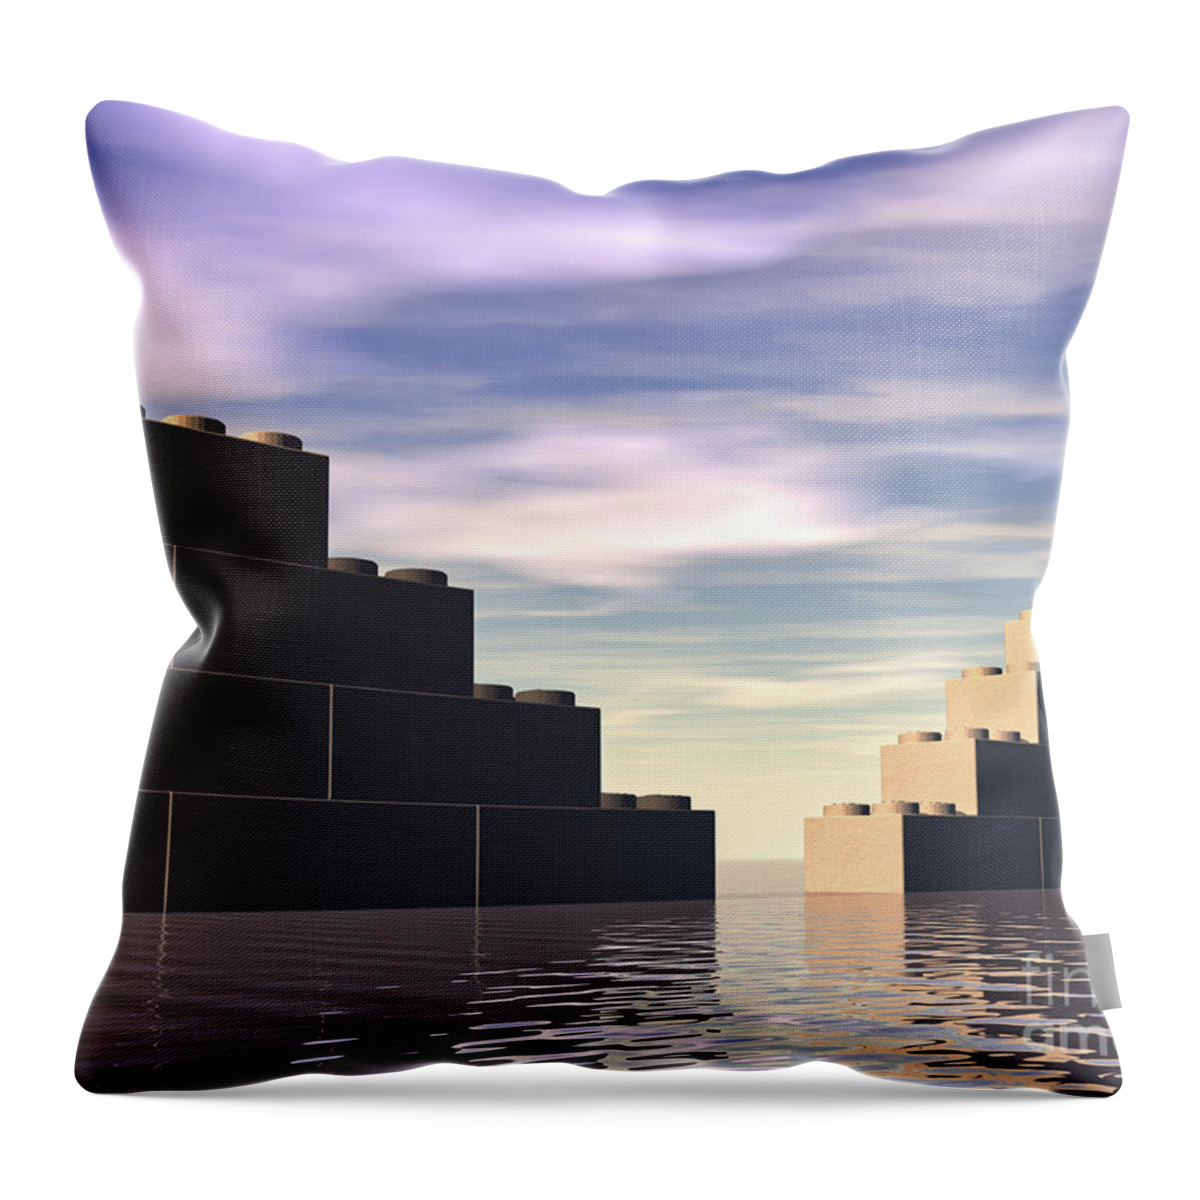 Landscape Throw Pillow featuring the digital art Brick Wall by Phil Perkins